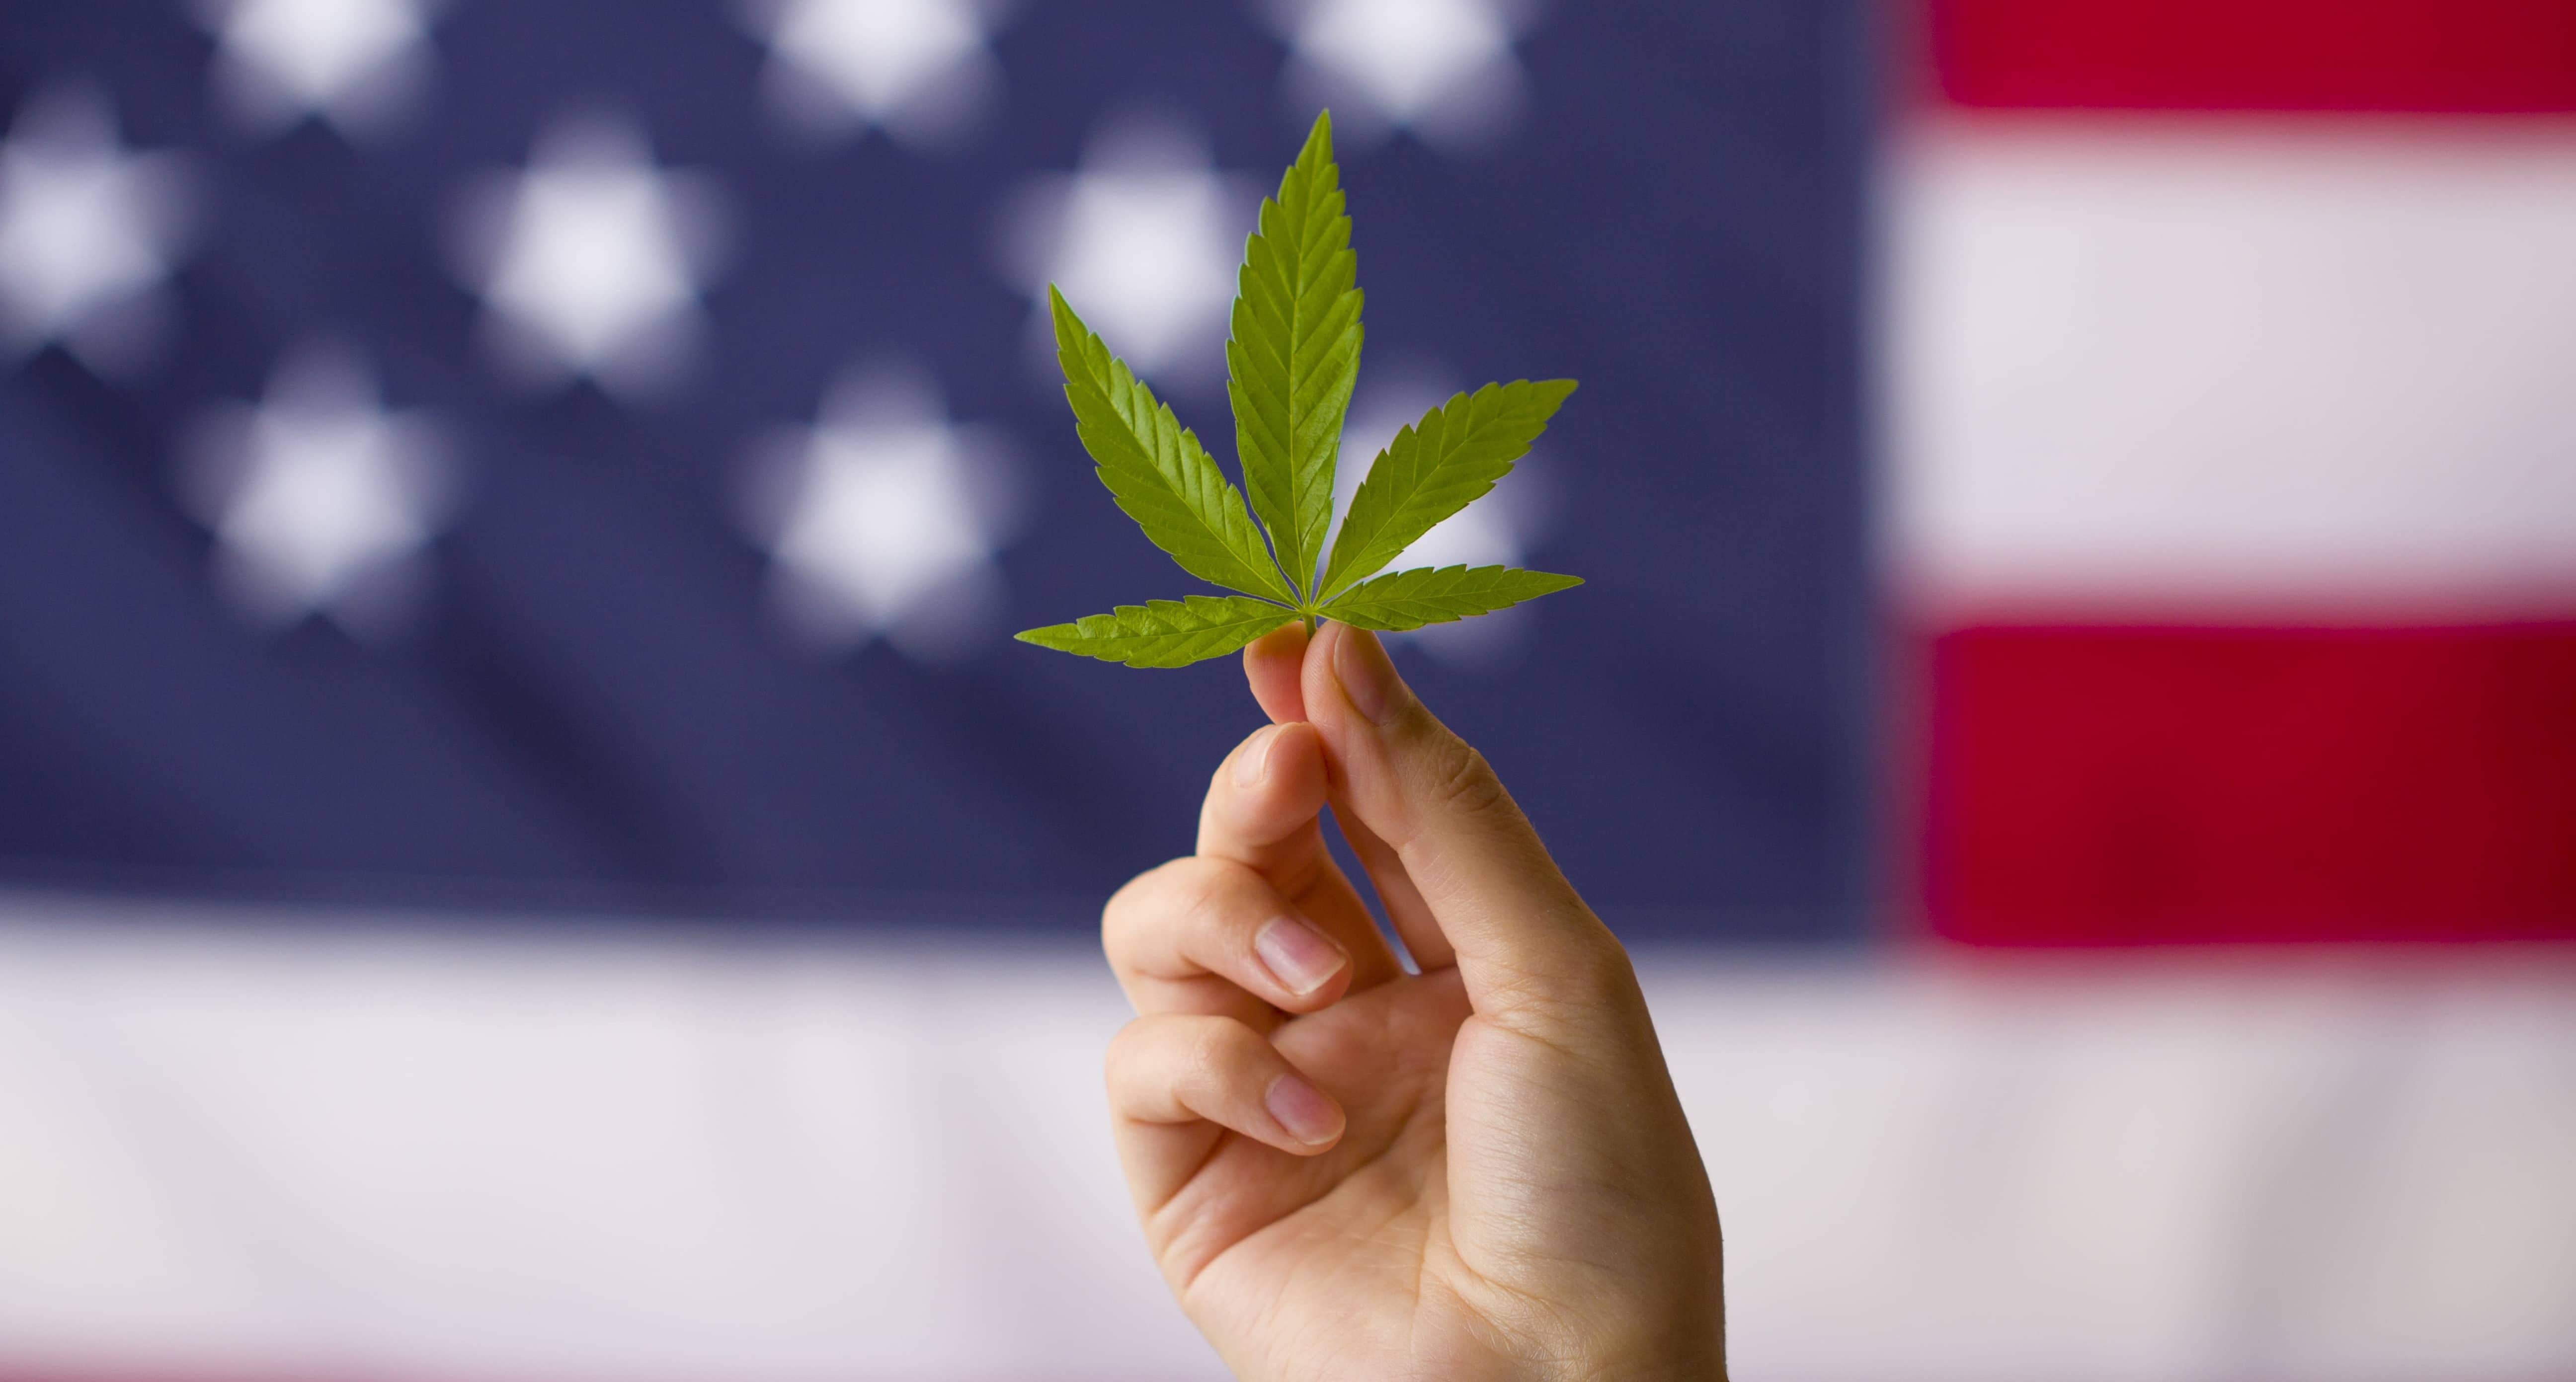 cannabis-legalization-in-the-united-states-of-america-cannabis-leaf-in-hands-on-usa-flag-background